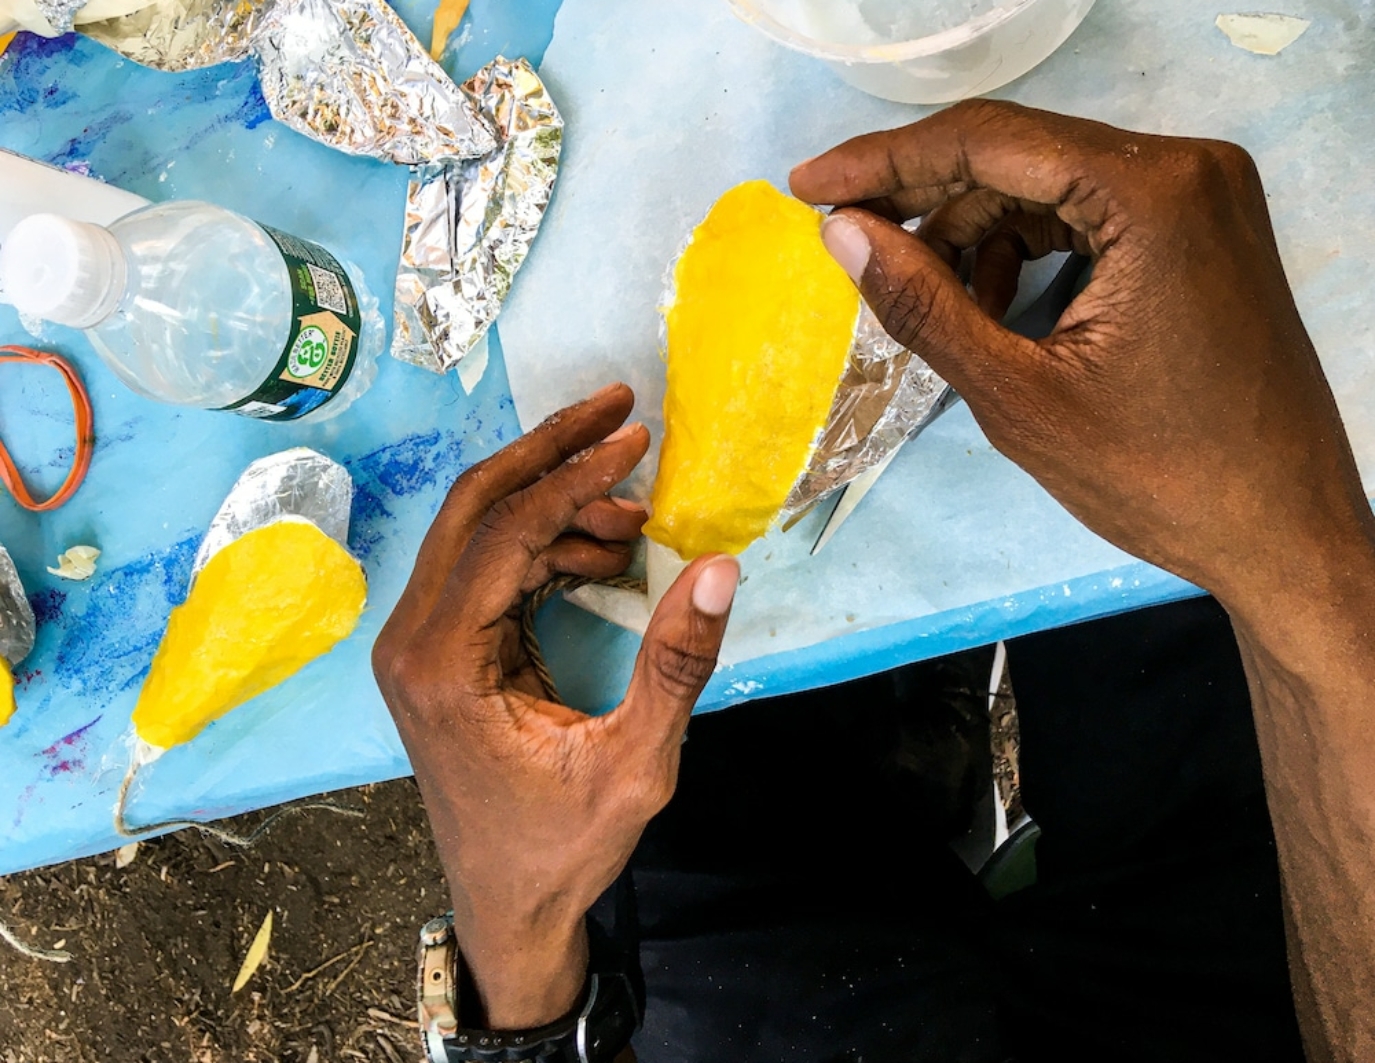 One pair of hands comes up from the bottom of the image and is holding a yellow flower that sort of looks like a mango. The blue table the hands rest on is filled with materials and tinfoil. This is the NYC event.